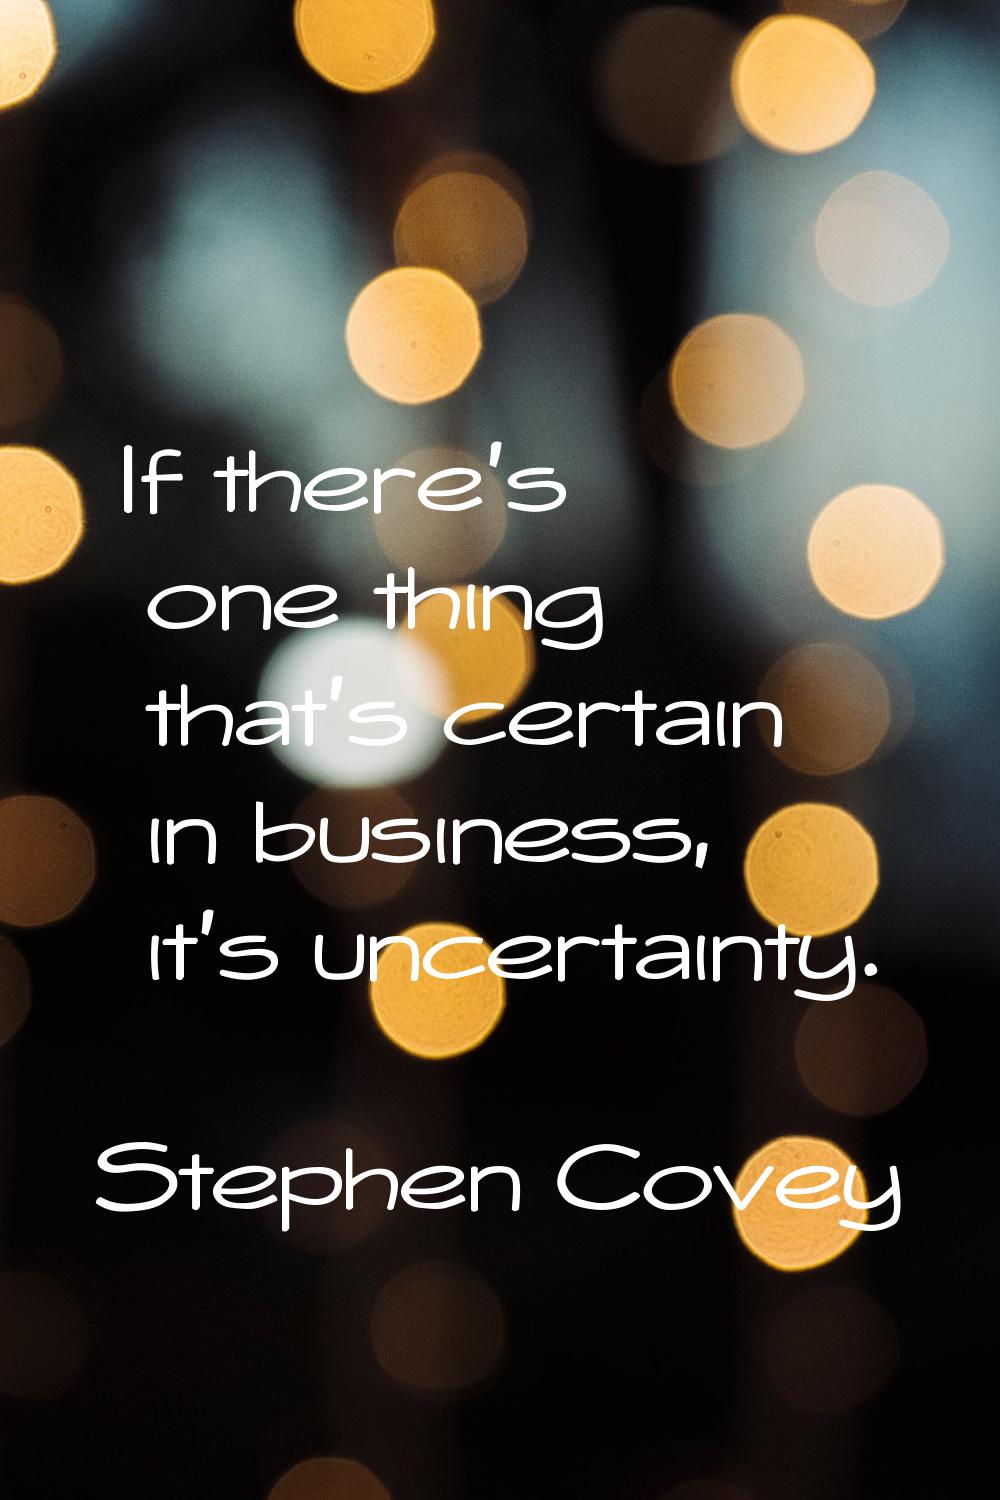 If there's one thing that's certain in business, it's uncertainty.